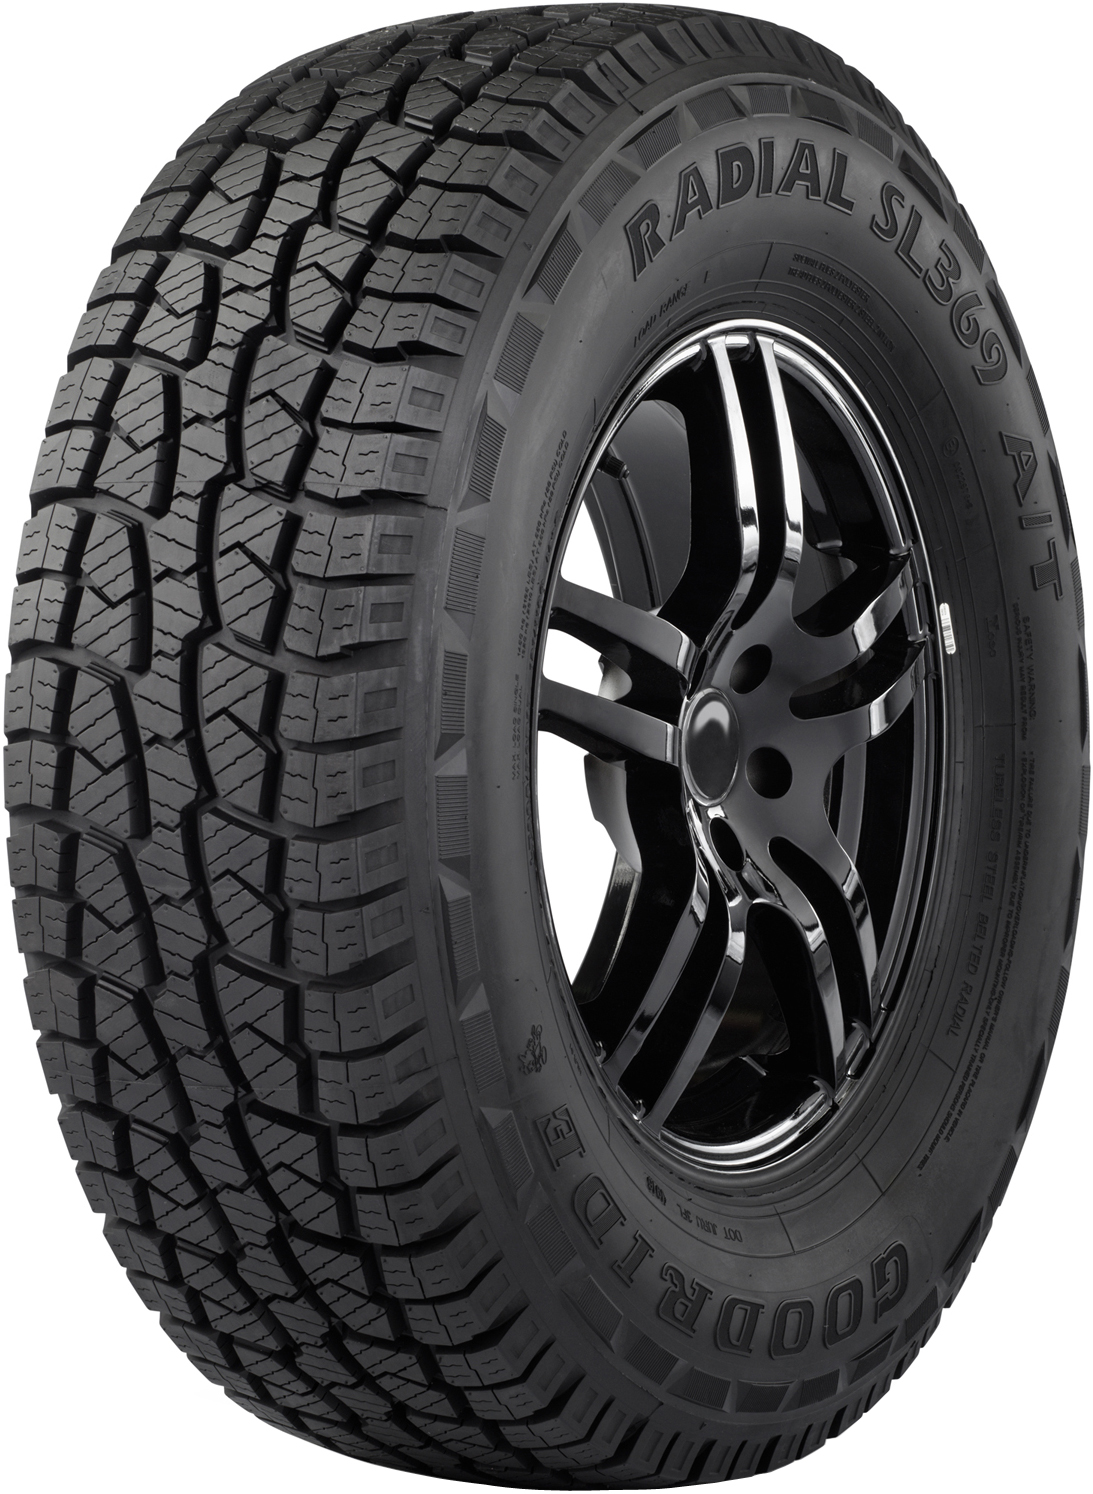 Anvelope jeep GOODRIDE Radial SL369 A/T XL 205/80 R16 104S